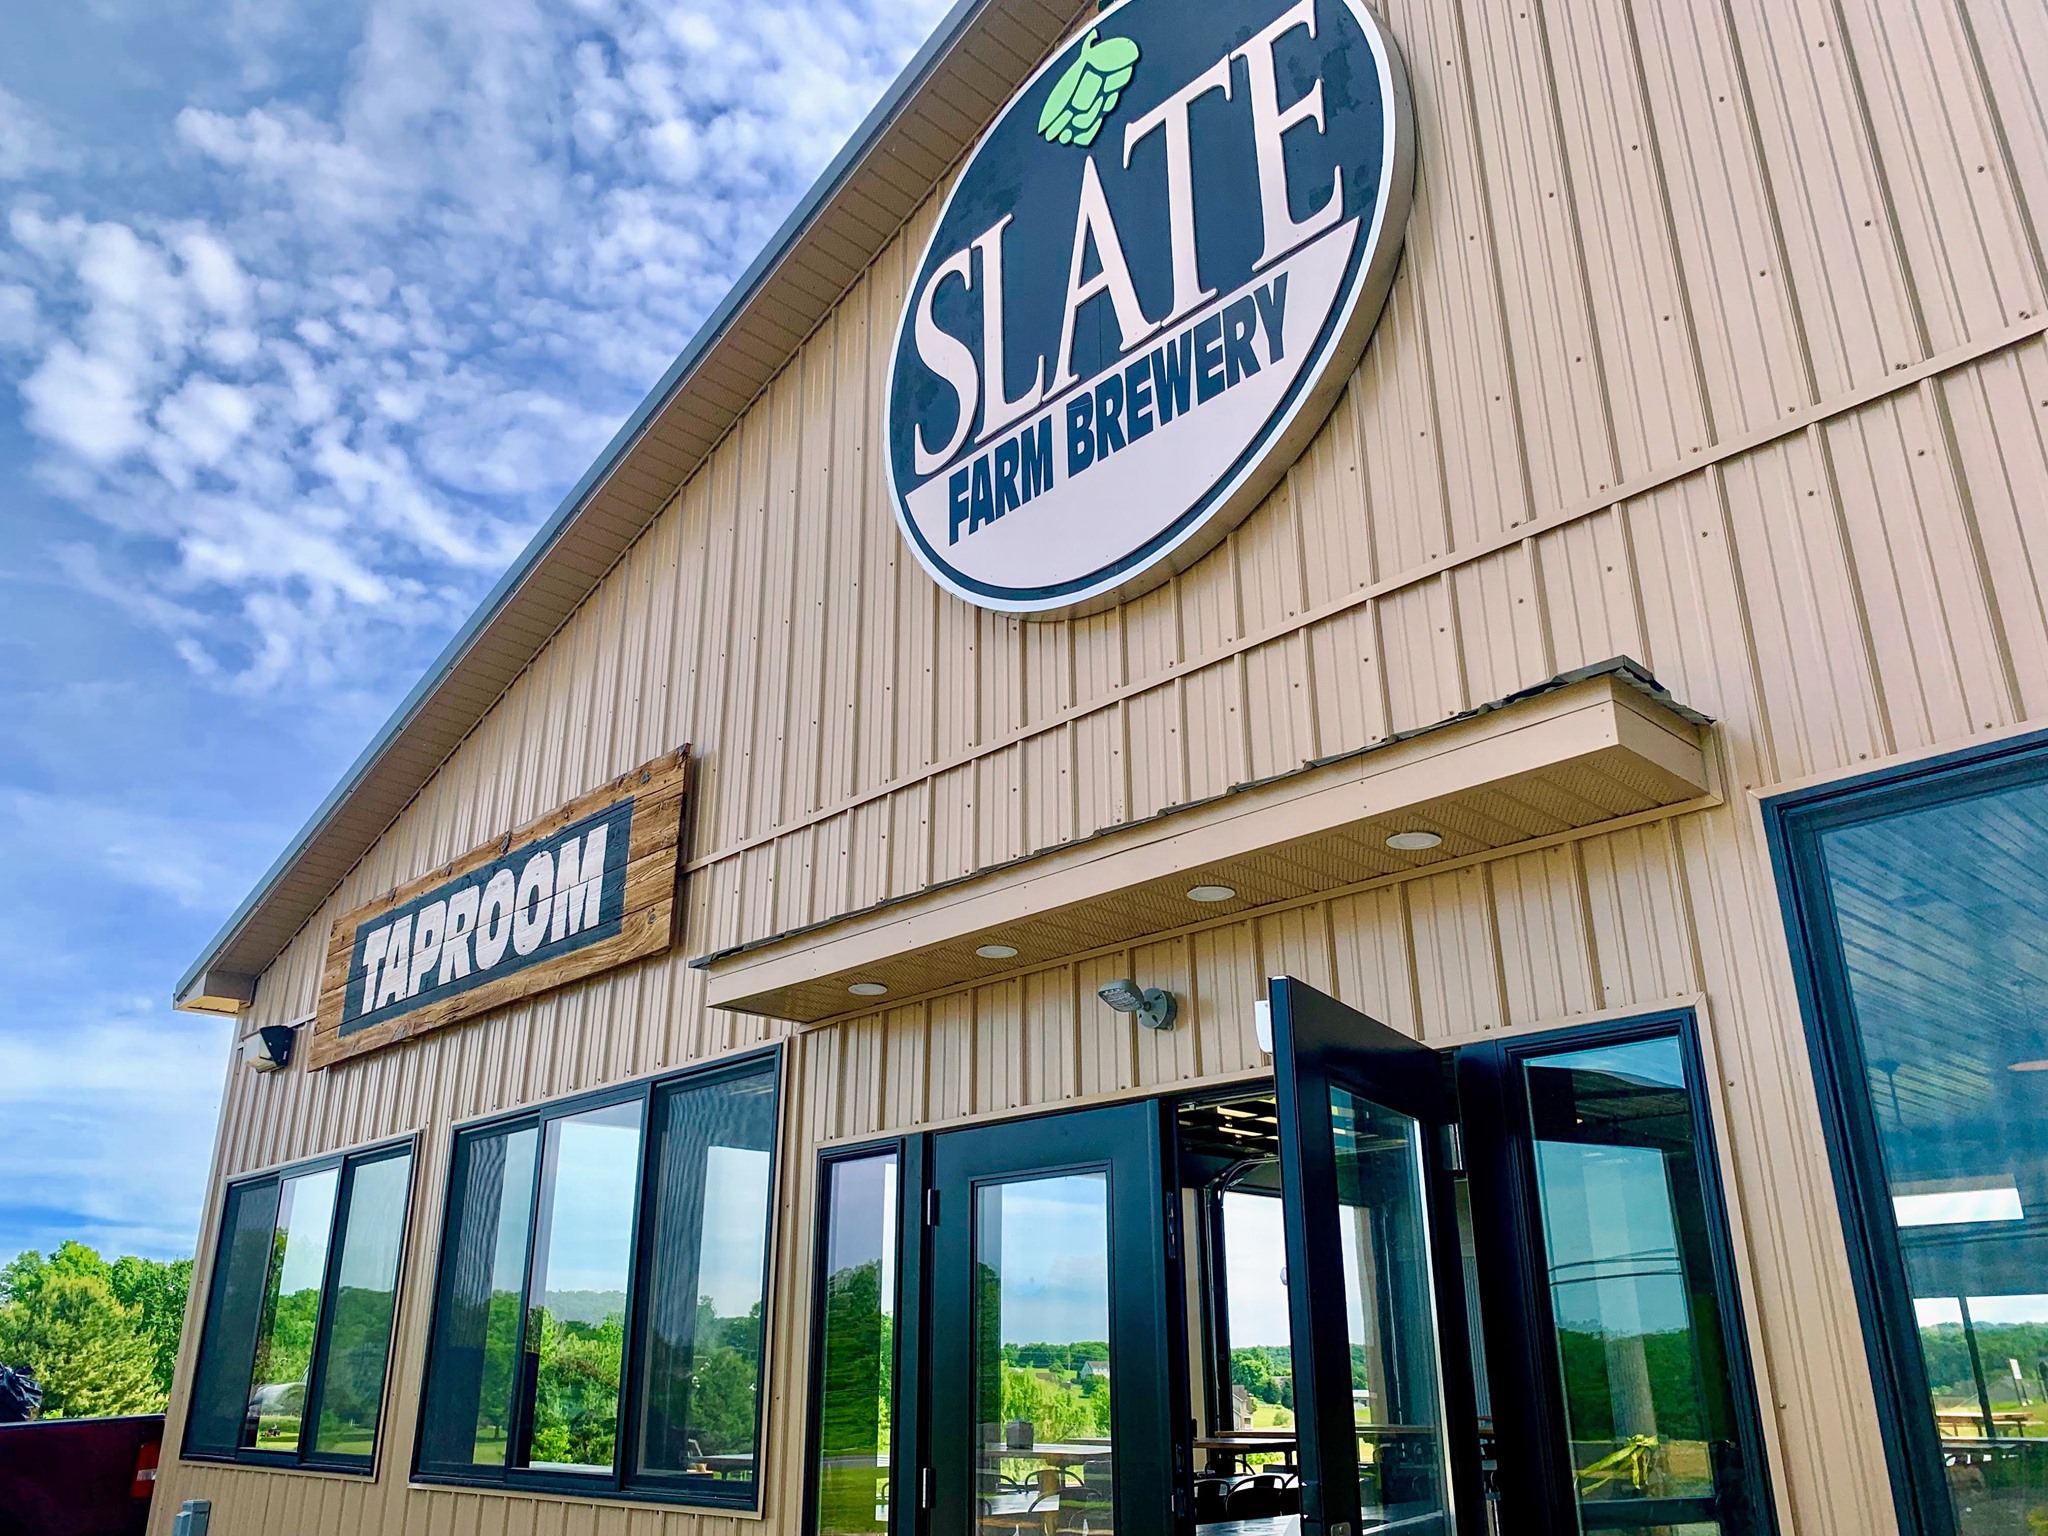 Exterior of Slate Farm Brewery